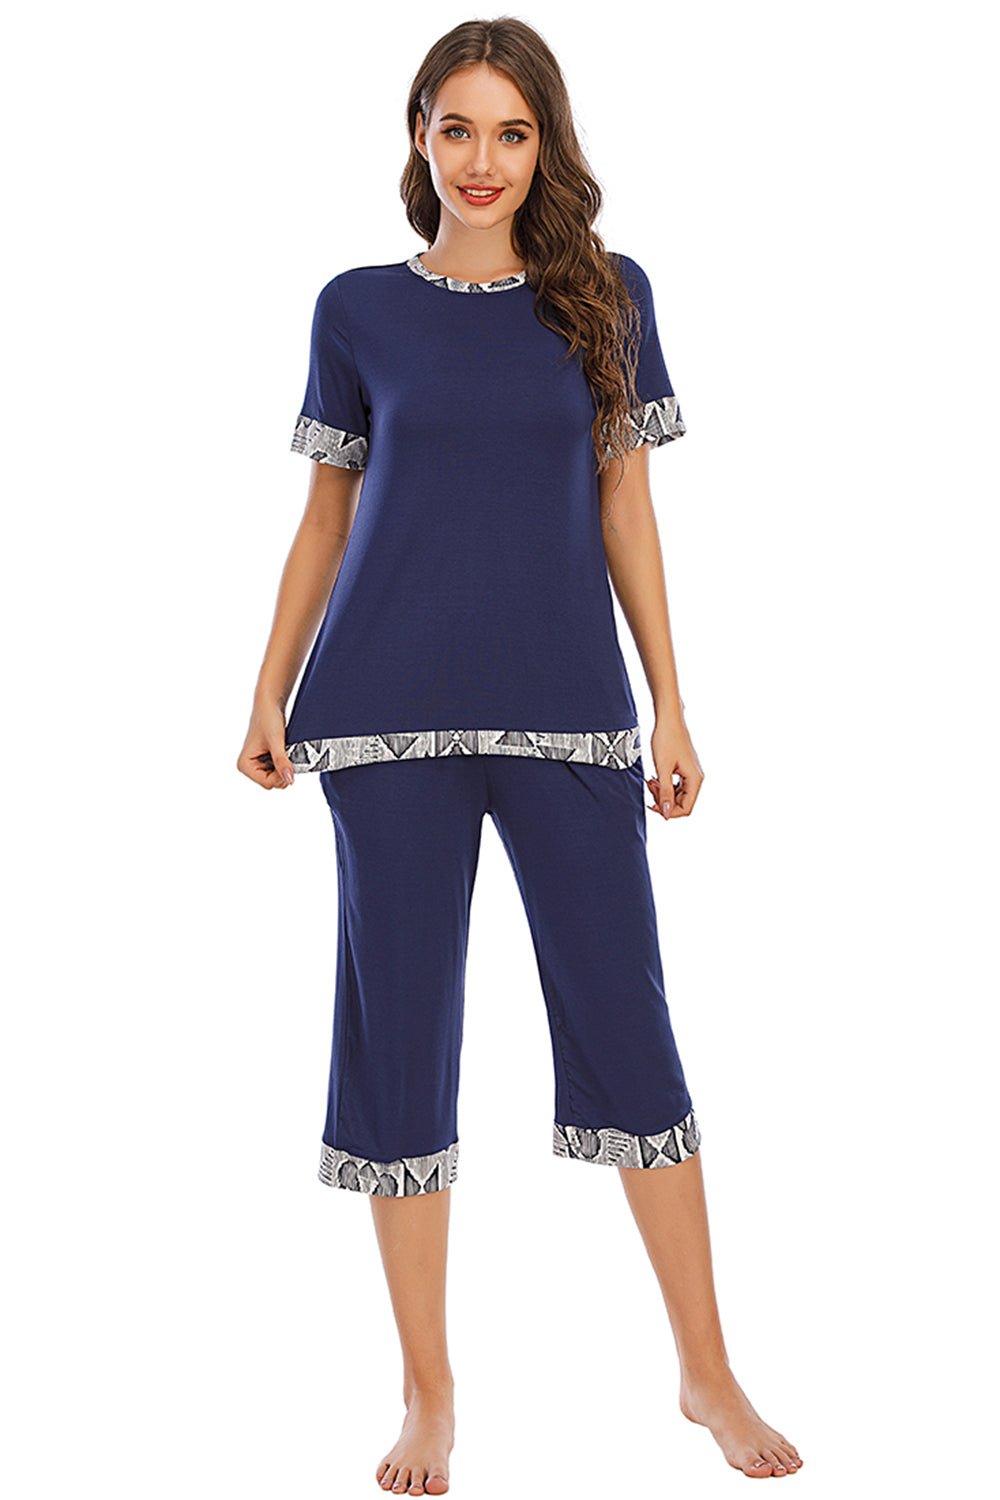 Round Neck Short Sleeve Top and Capris Pants Lounge Set - OMG! Rose